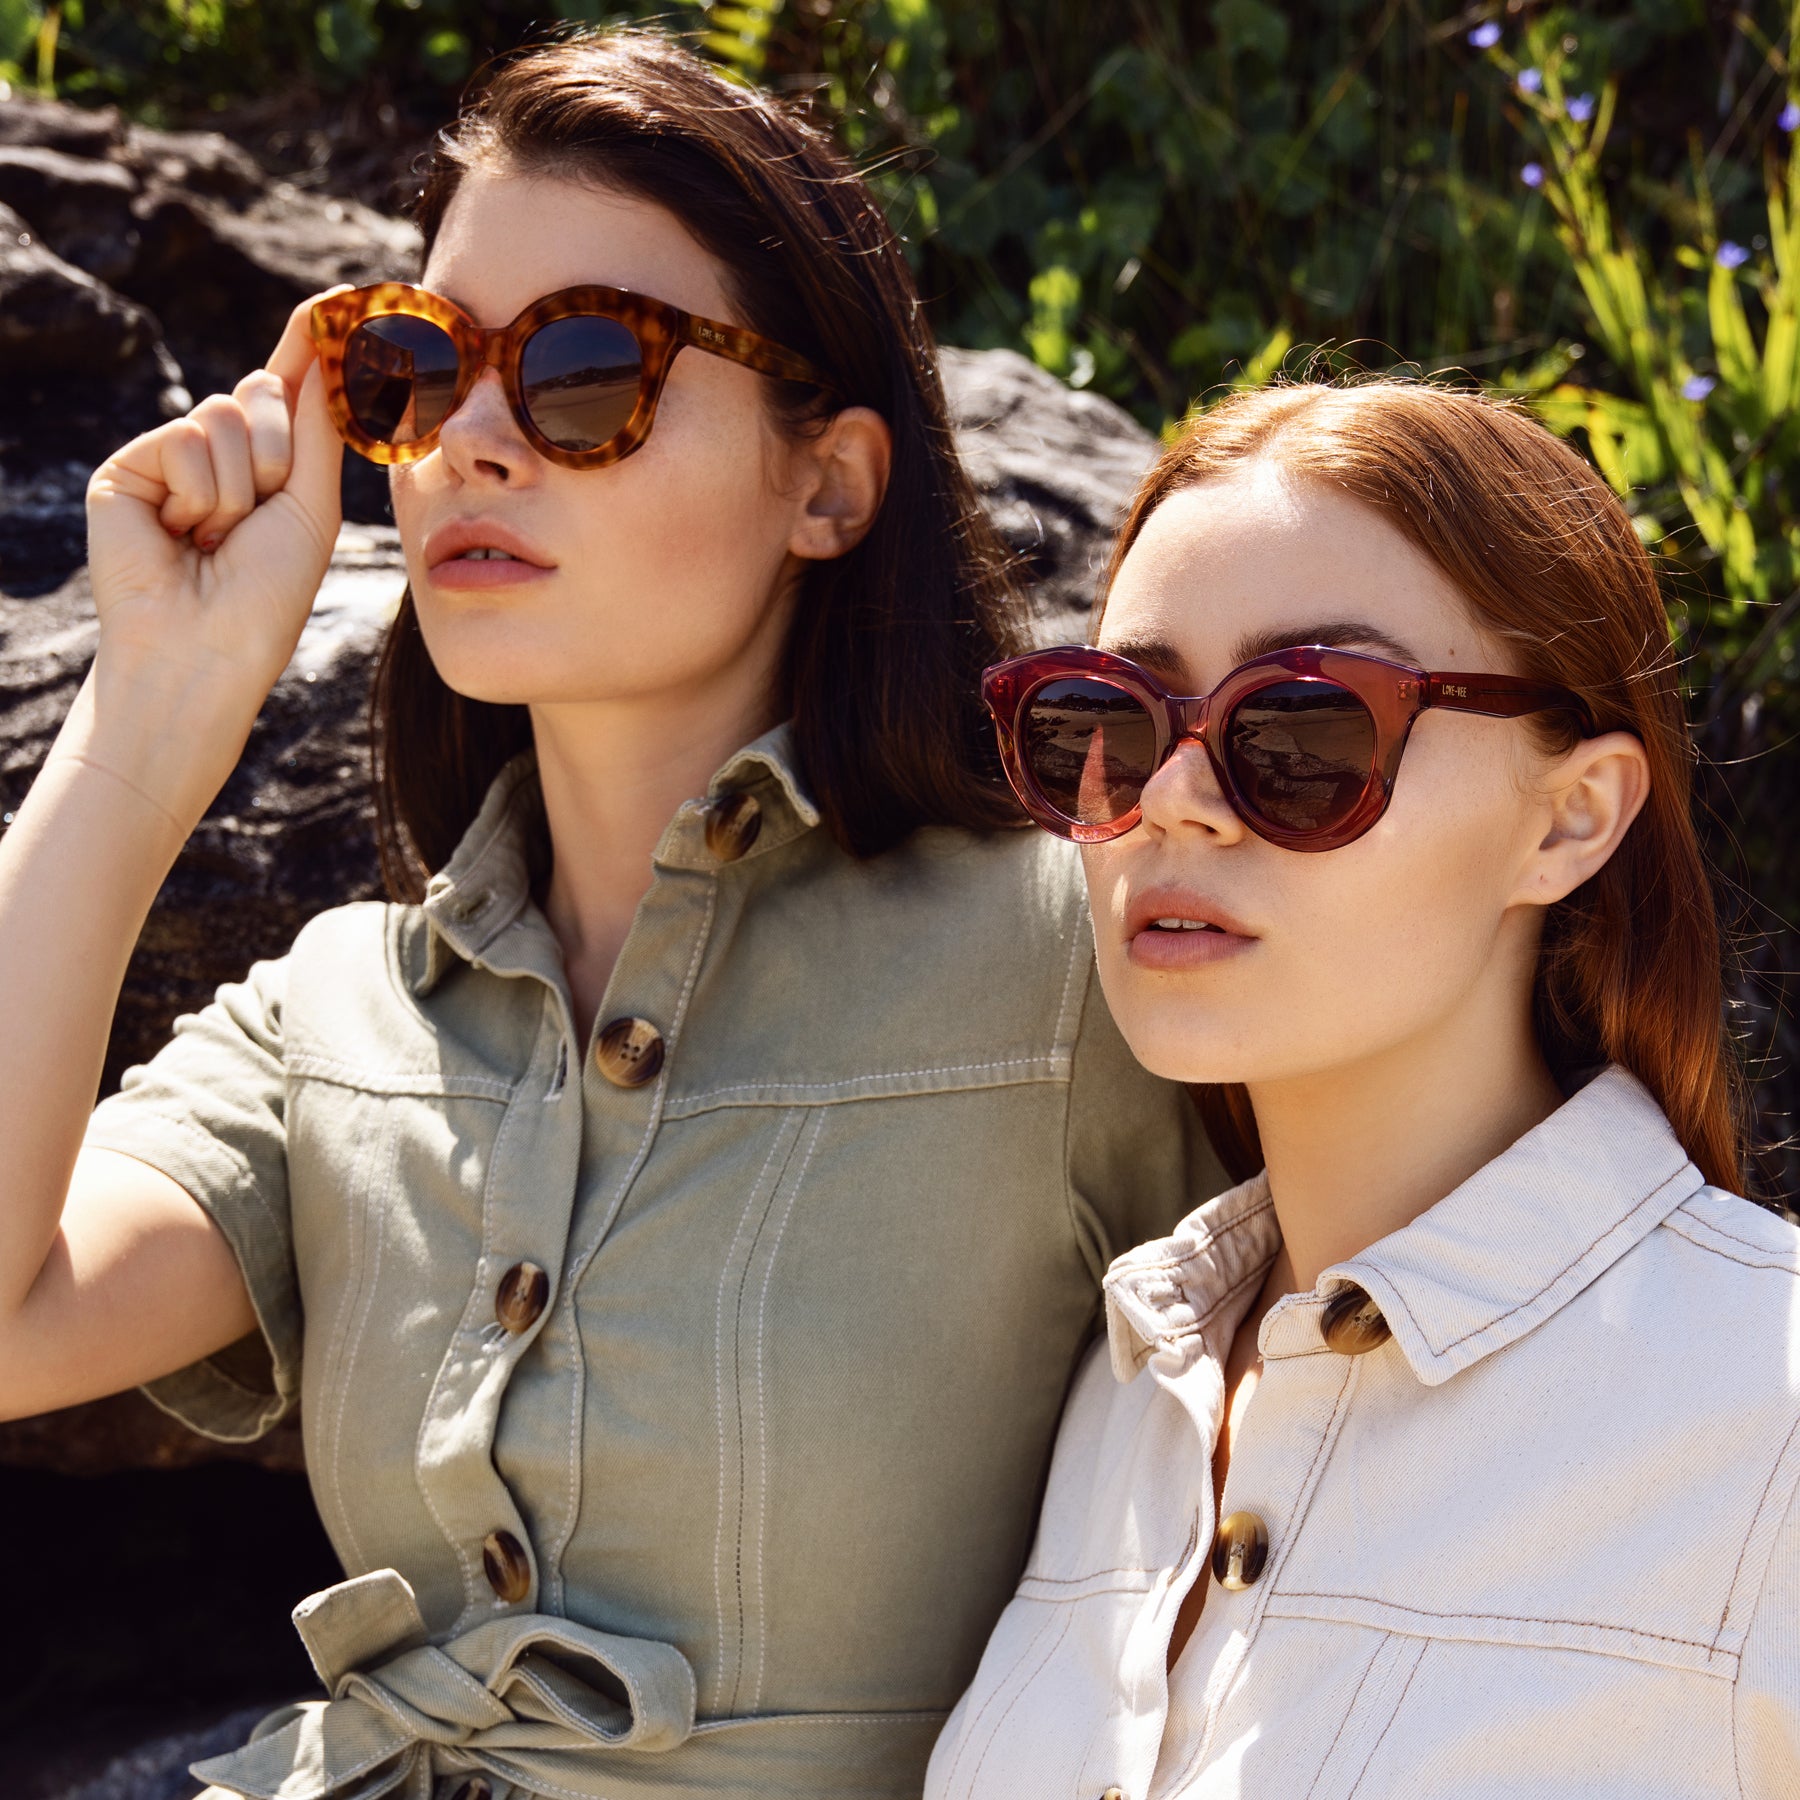 Plant-Based Acetate Burgundy Round Sunglasses Styled With Safari Outfit